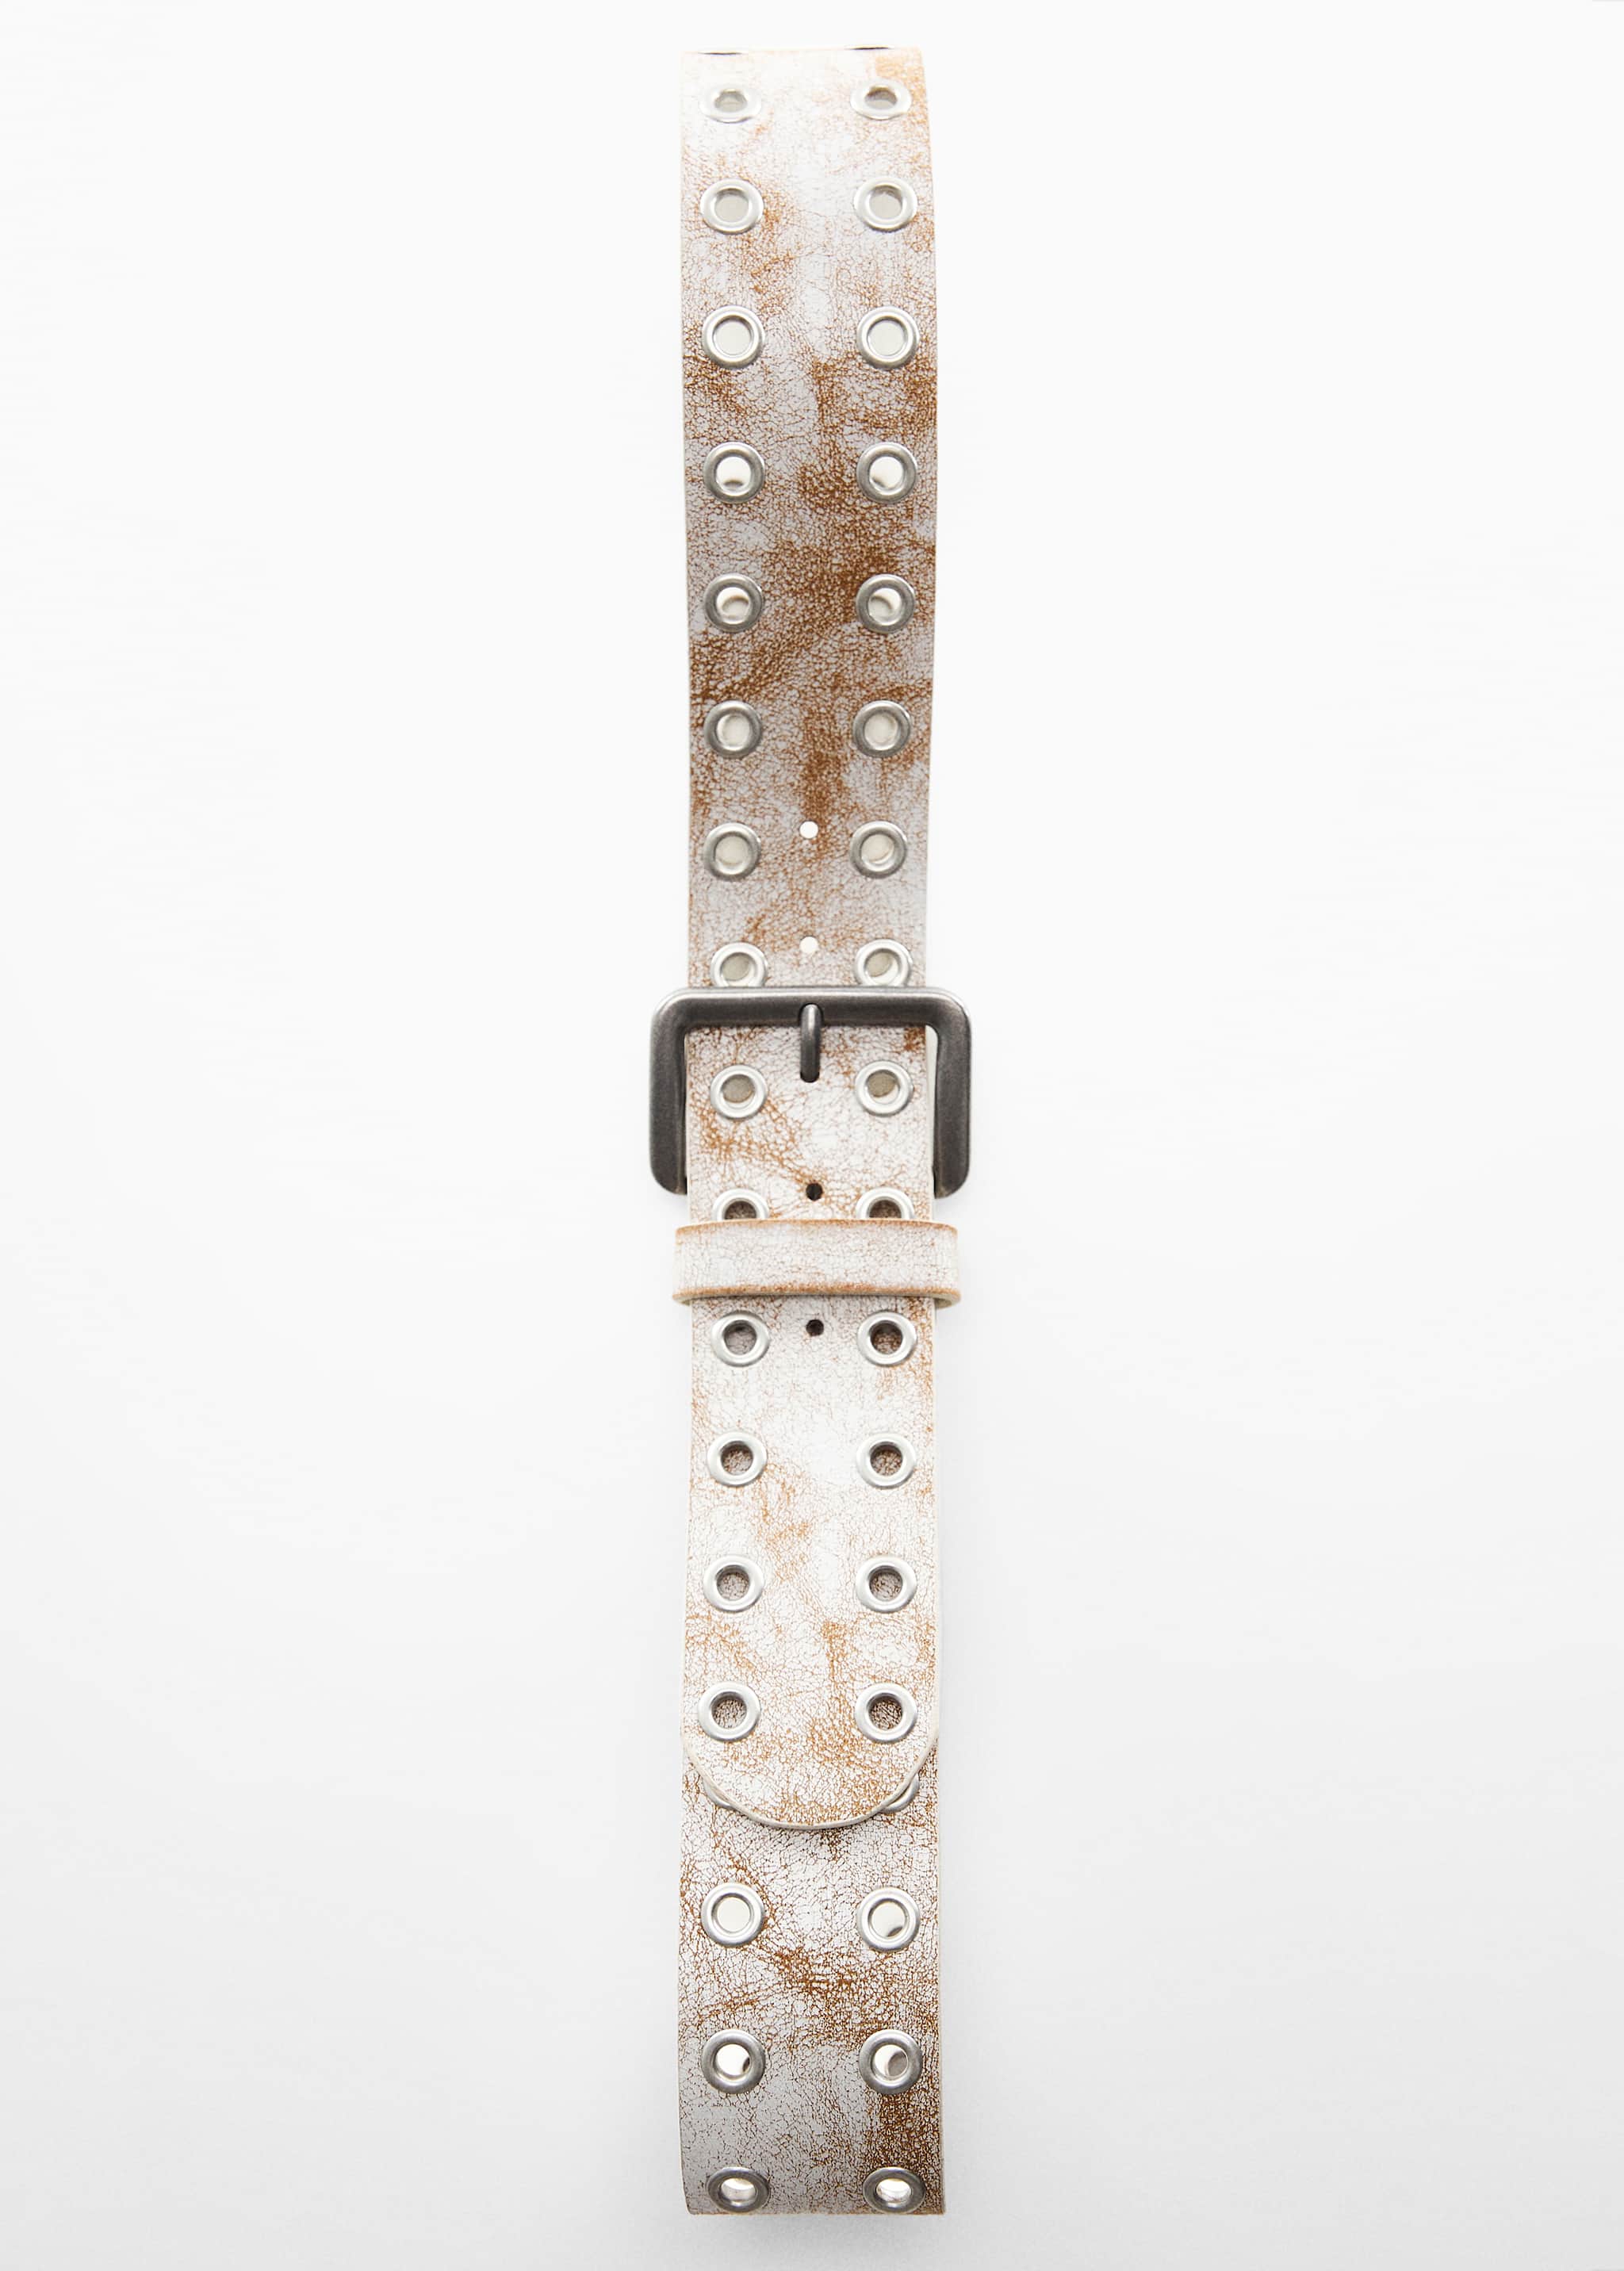 Die-cut belt with a worn effect - Details of the article 5